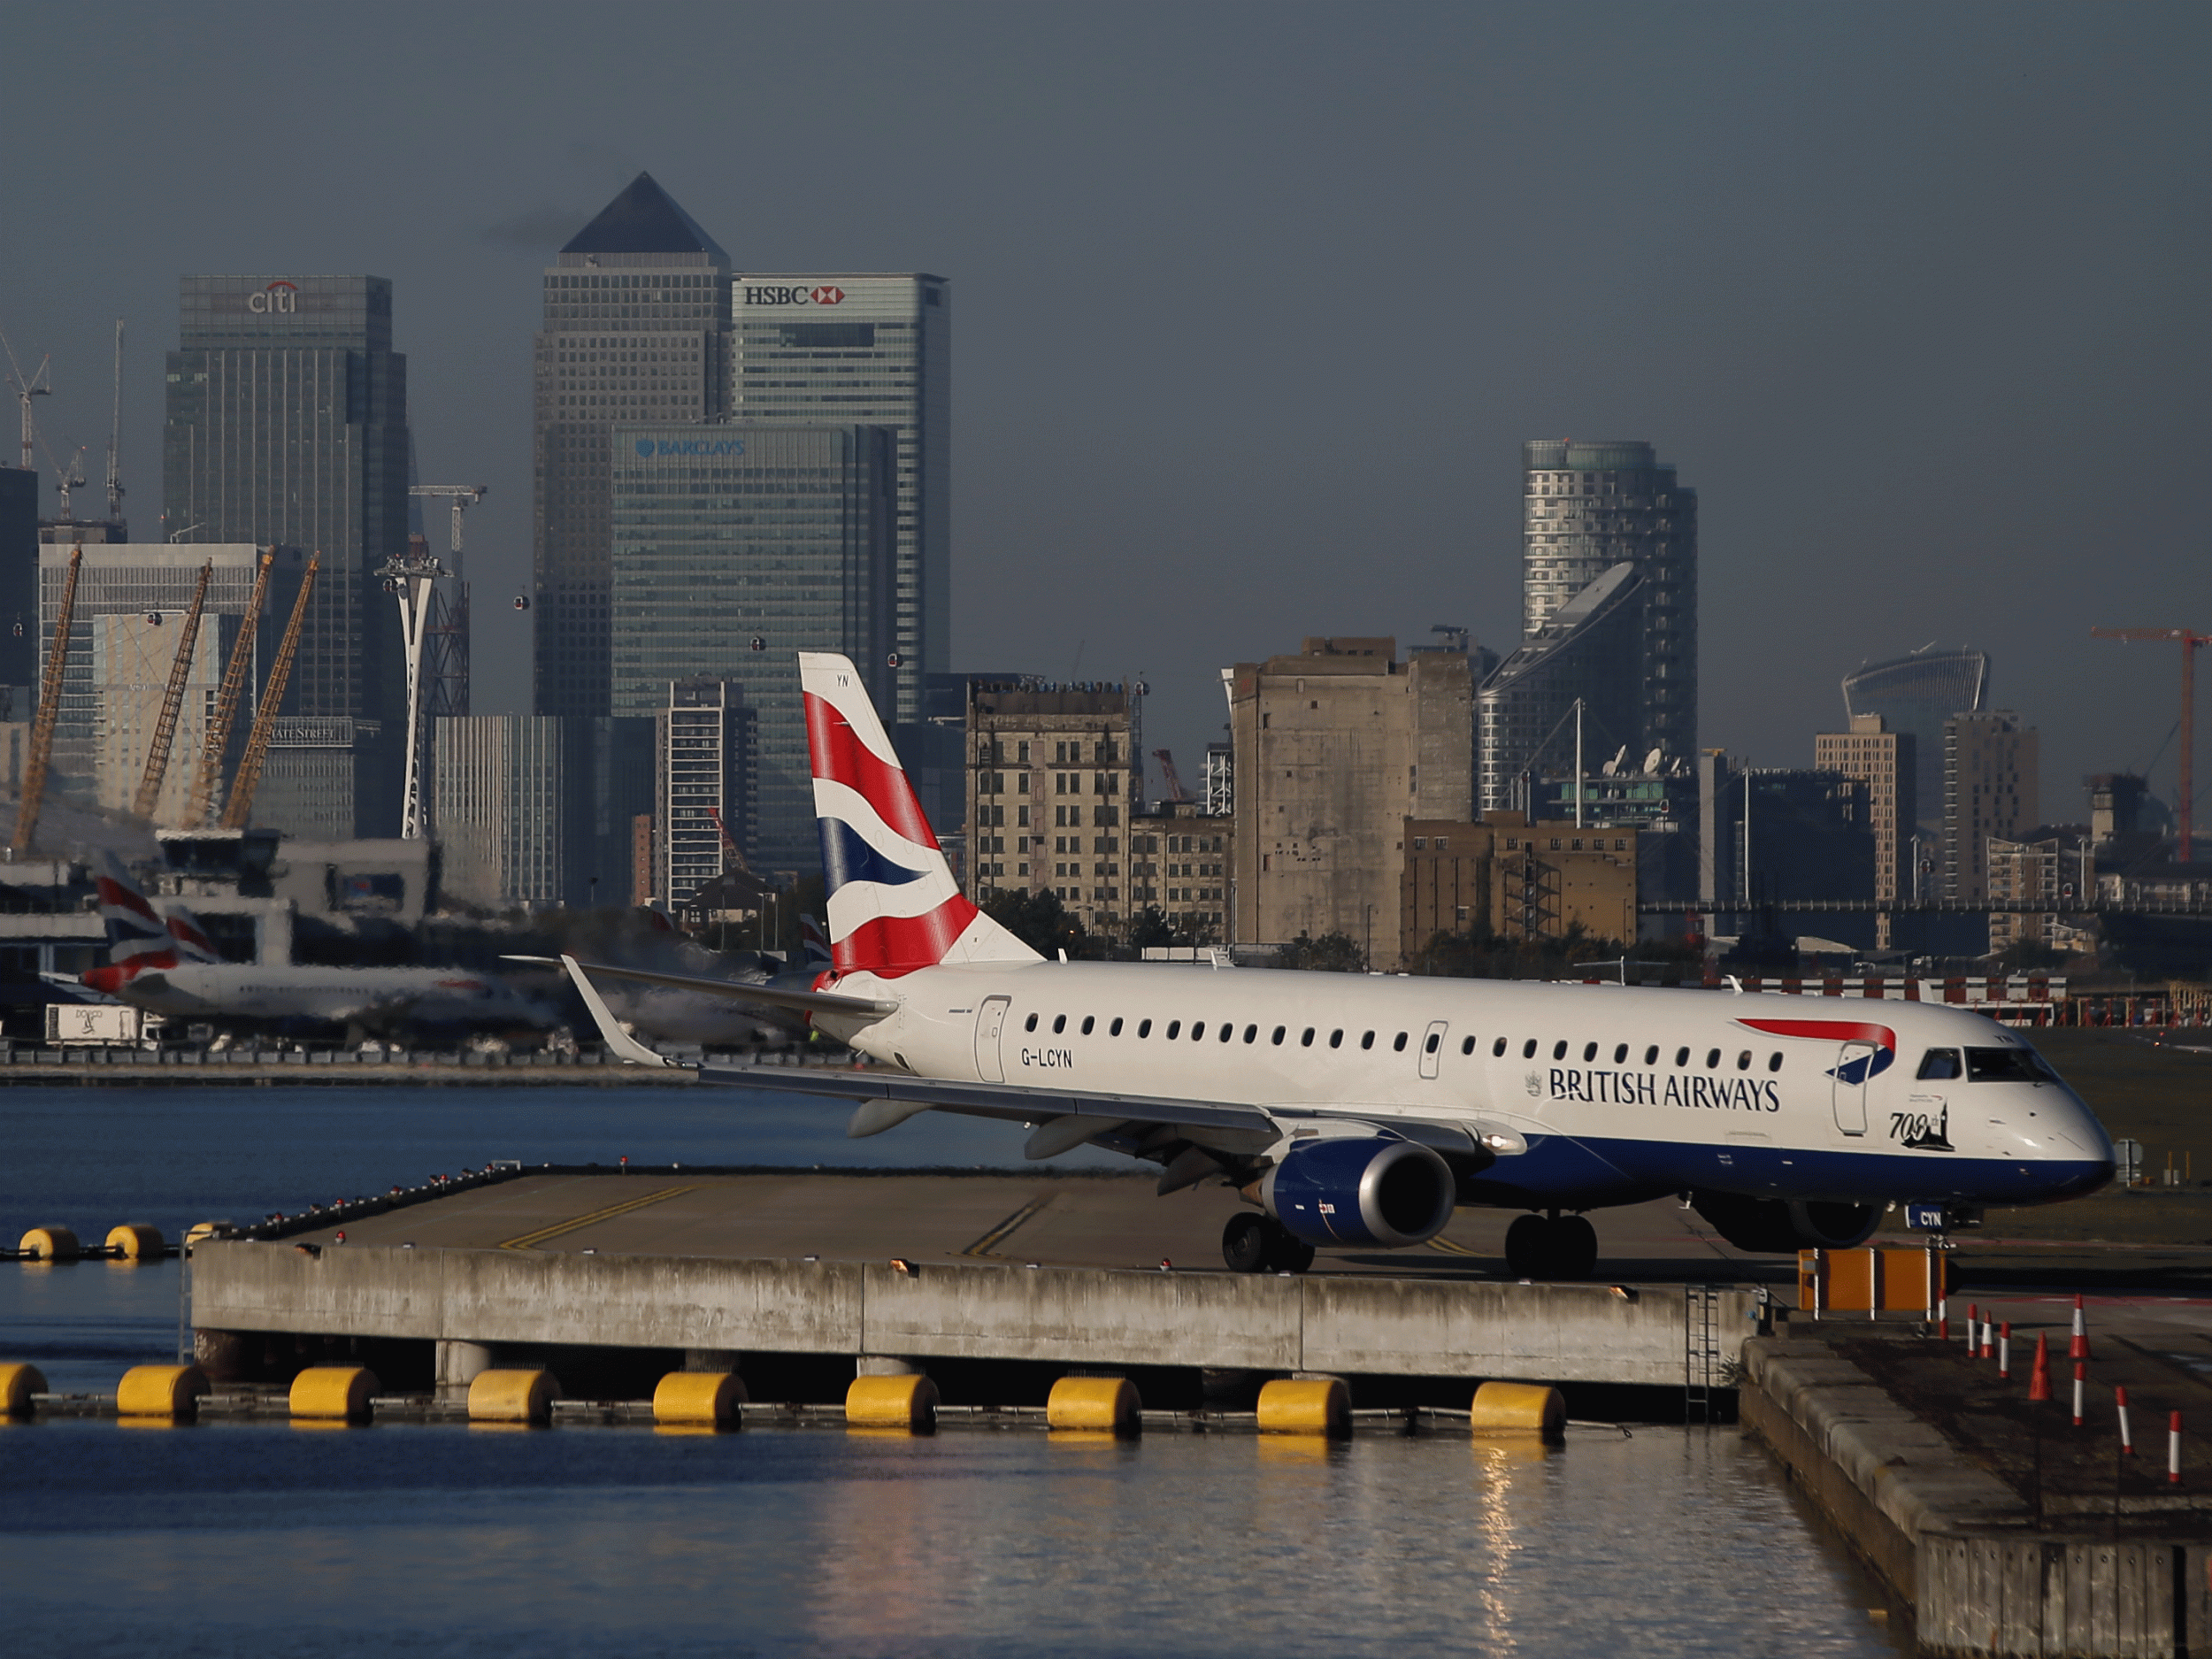 London City airport prepares for three-day climate ‘shut down’